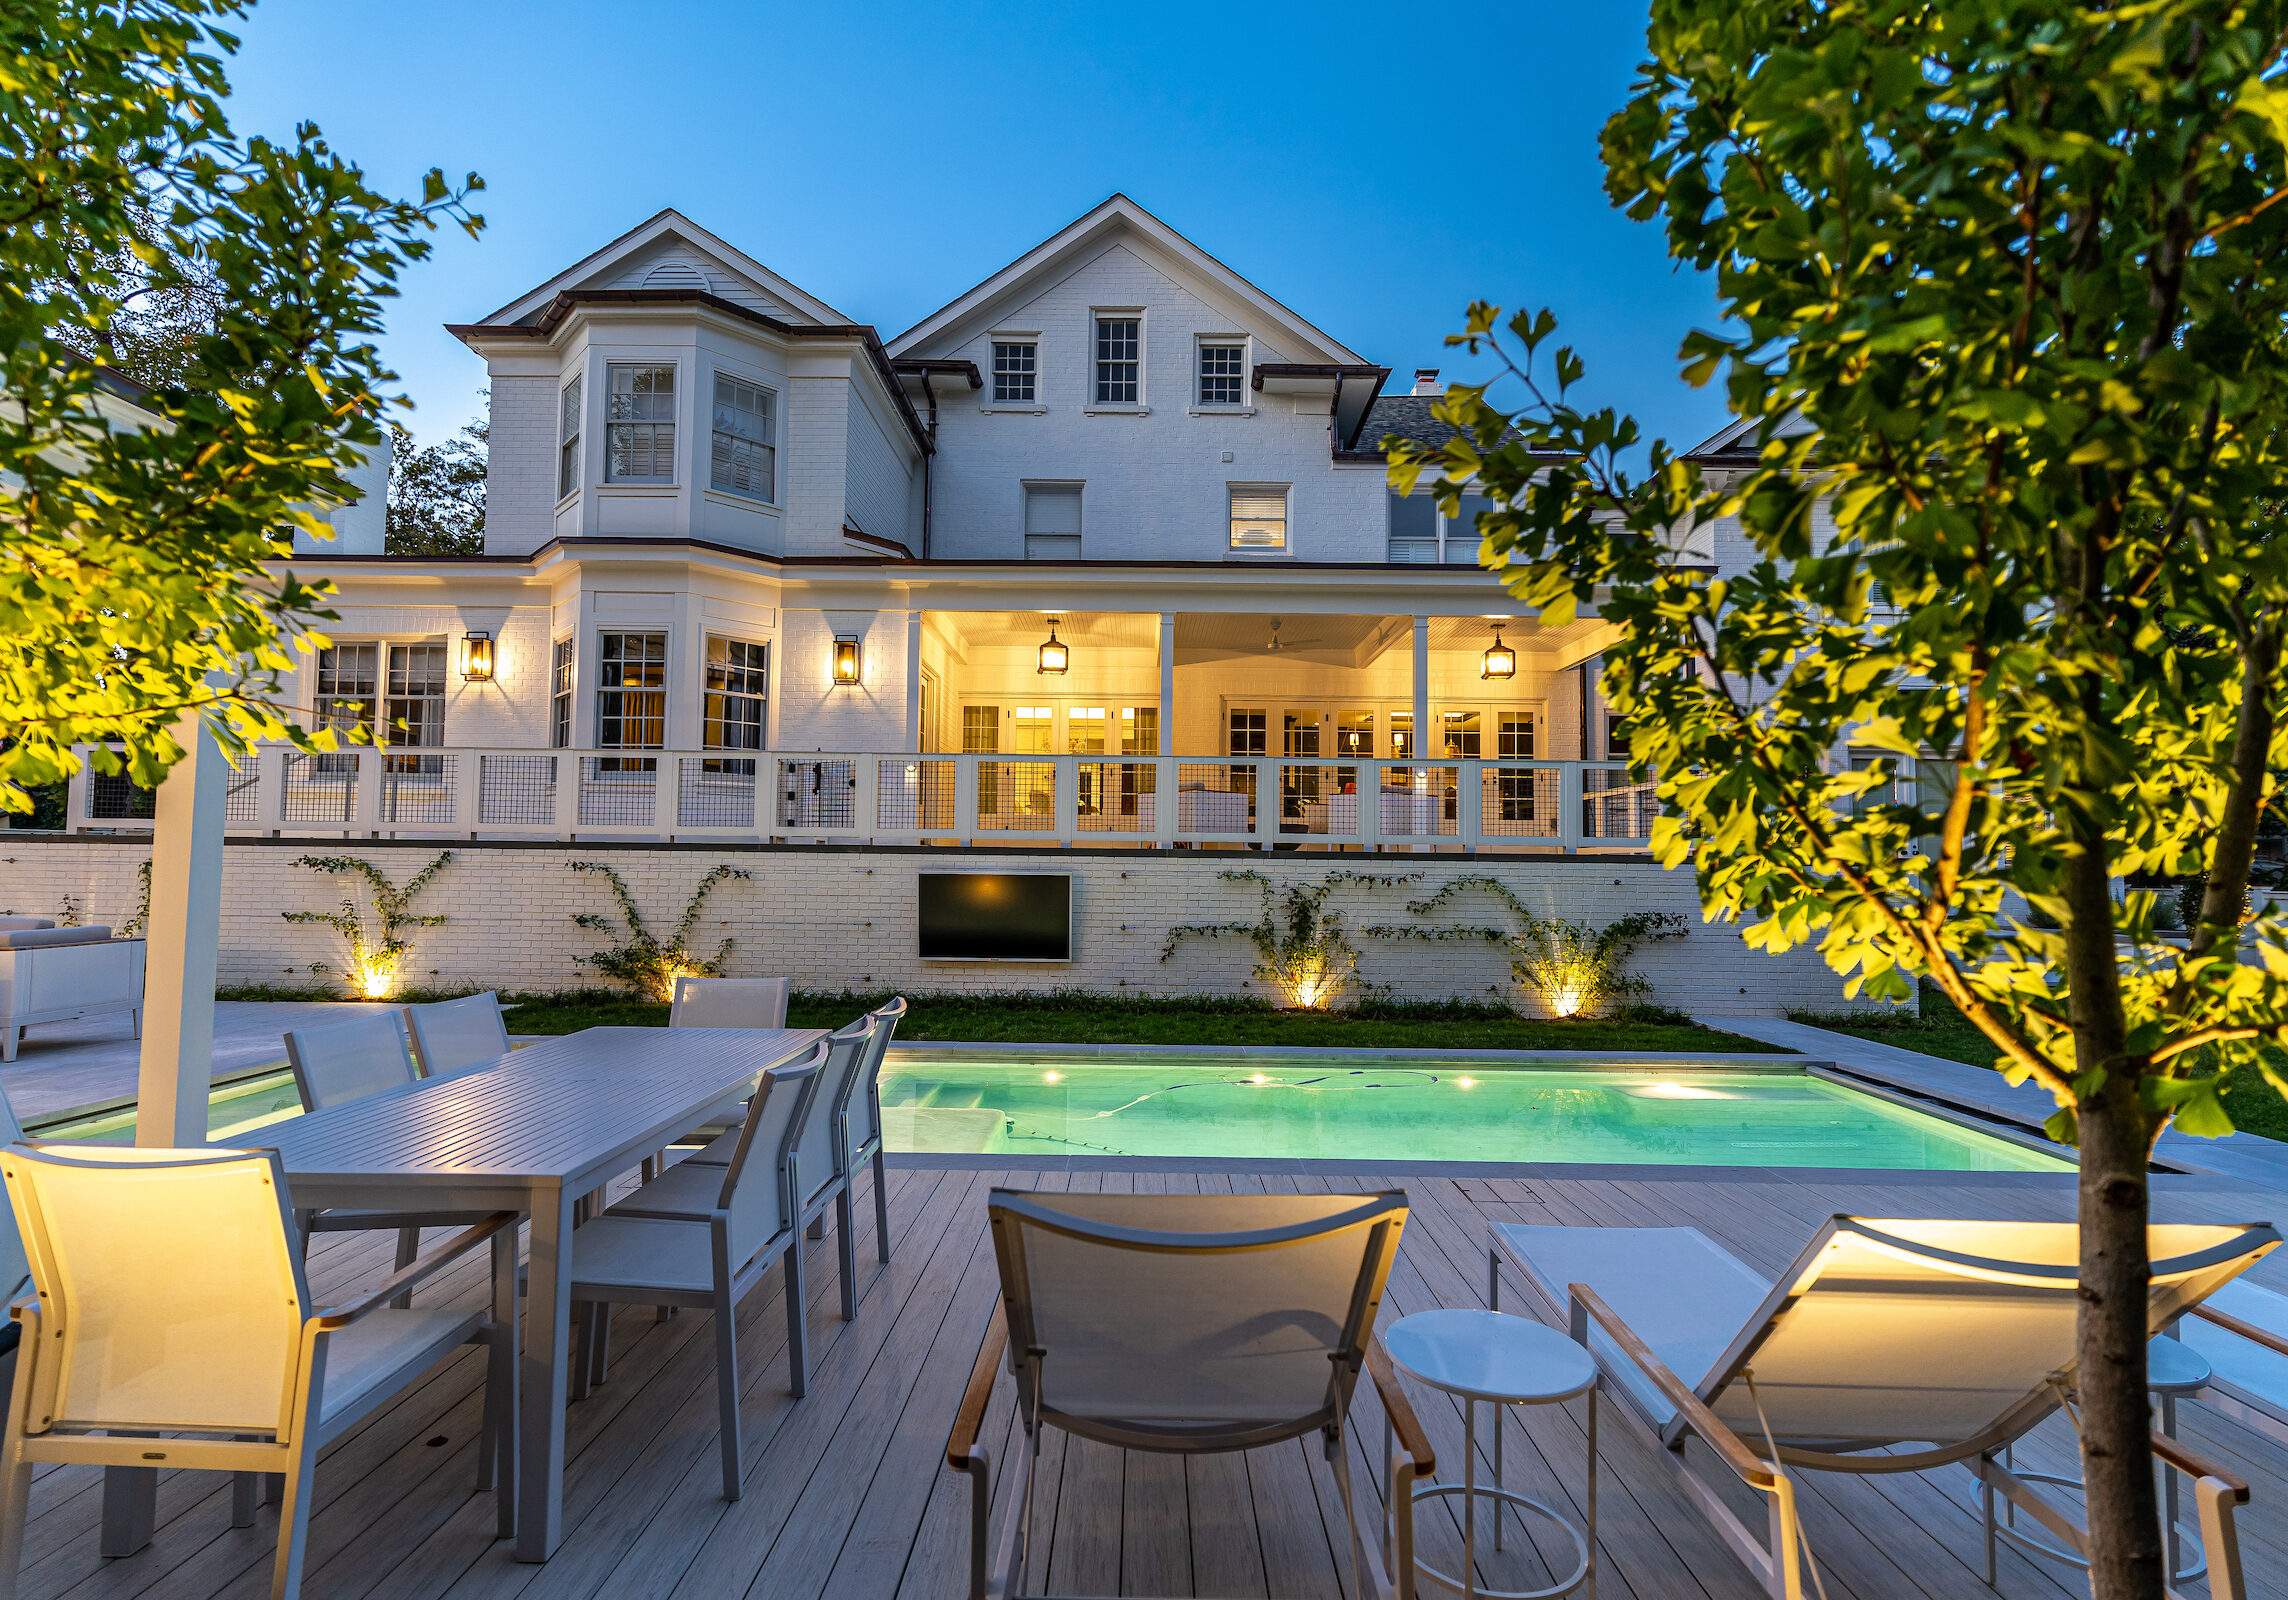 Exterior Shot of Luxury Home in Washington DC at Night, Lit-Up Pool